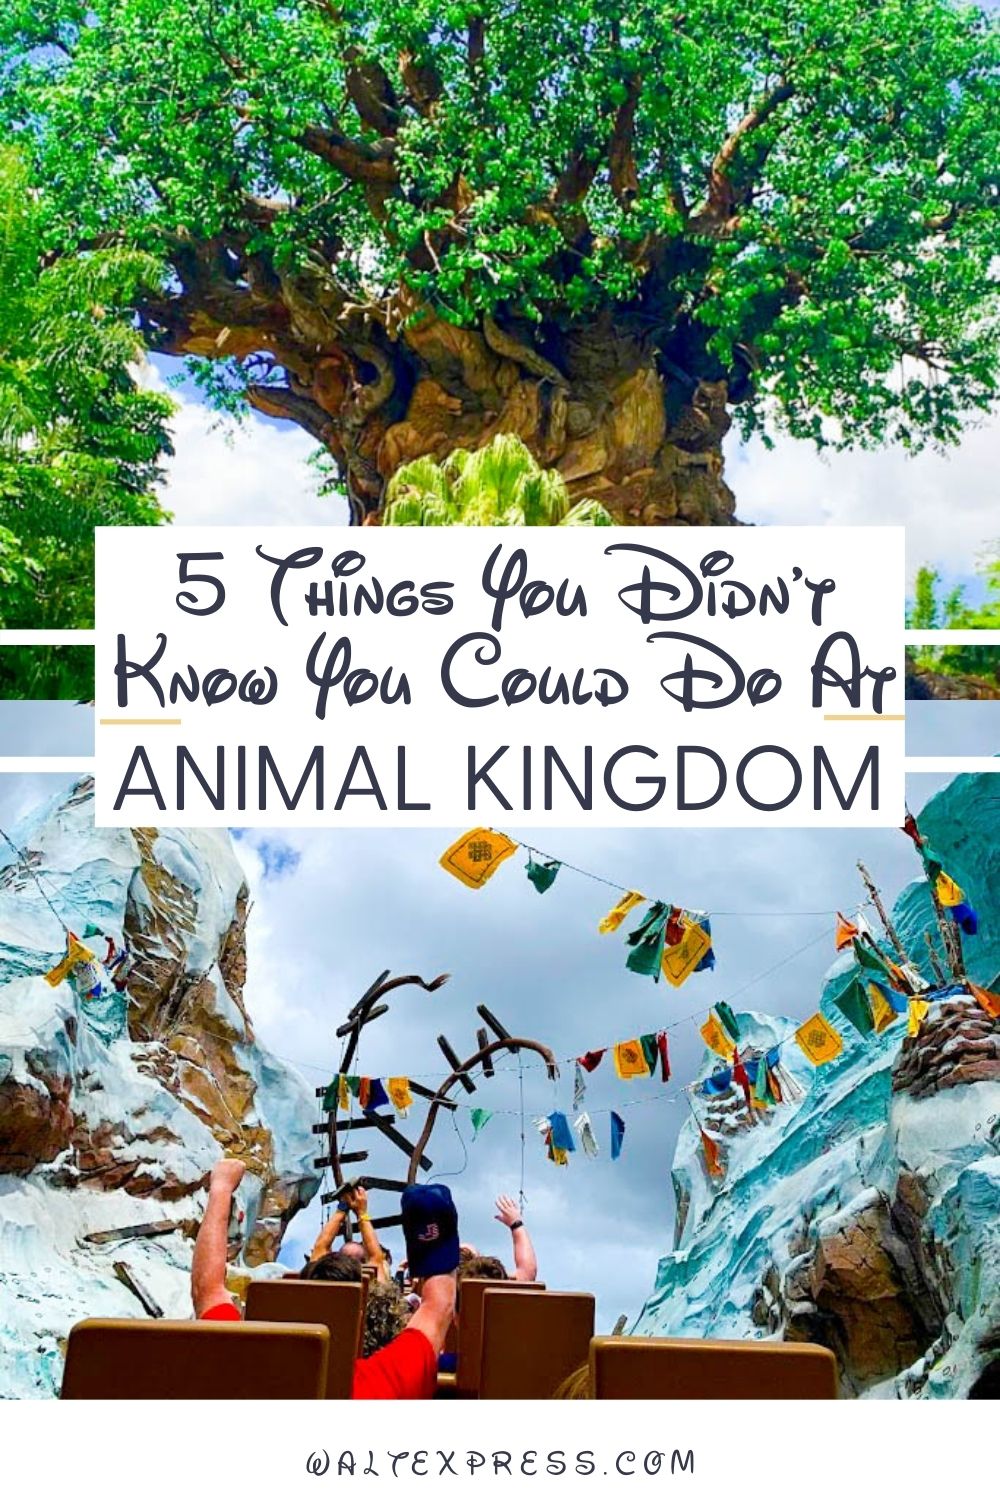 5 Things You Didn't Know You Could Do at Animal Kingdom